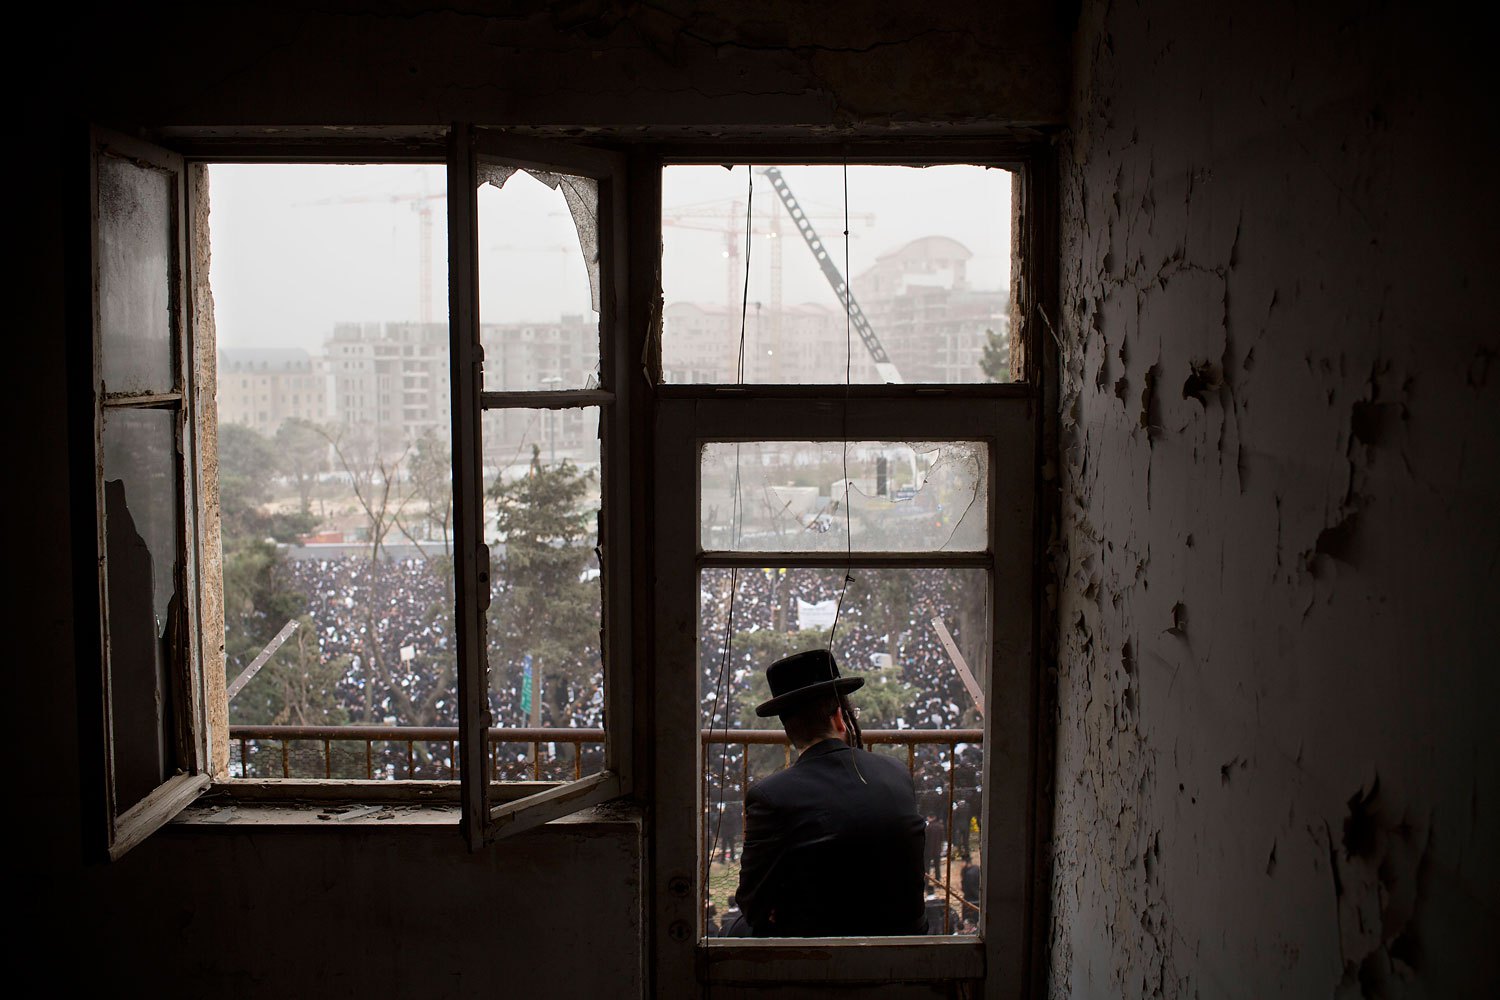 An ultra-Orthodox Jewish man watches from a balcony as hundreds of thousands of ultra-Orthodox Jews rally in a massive show of force against plans to force them to serve in the Israeli military, blocking roads and paralyzing the city of Jerusalem, March 2, 2014.